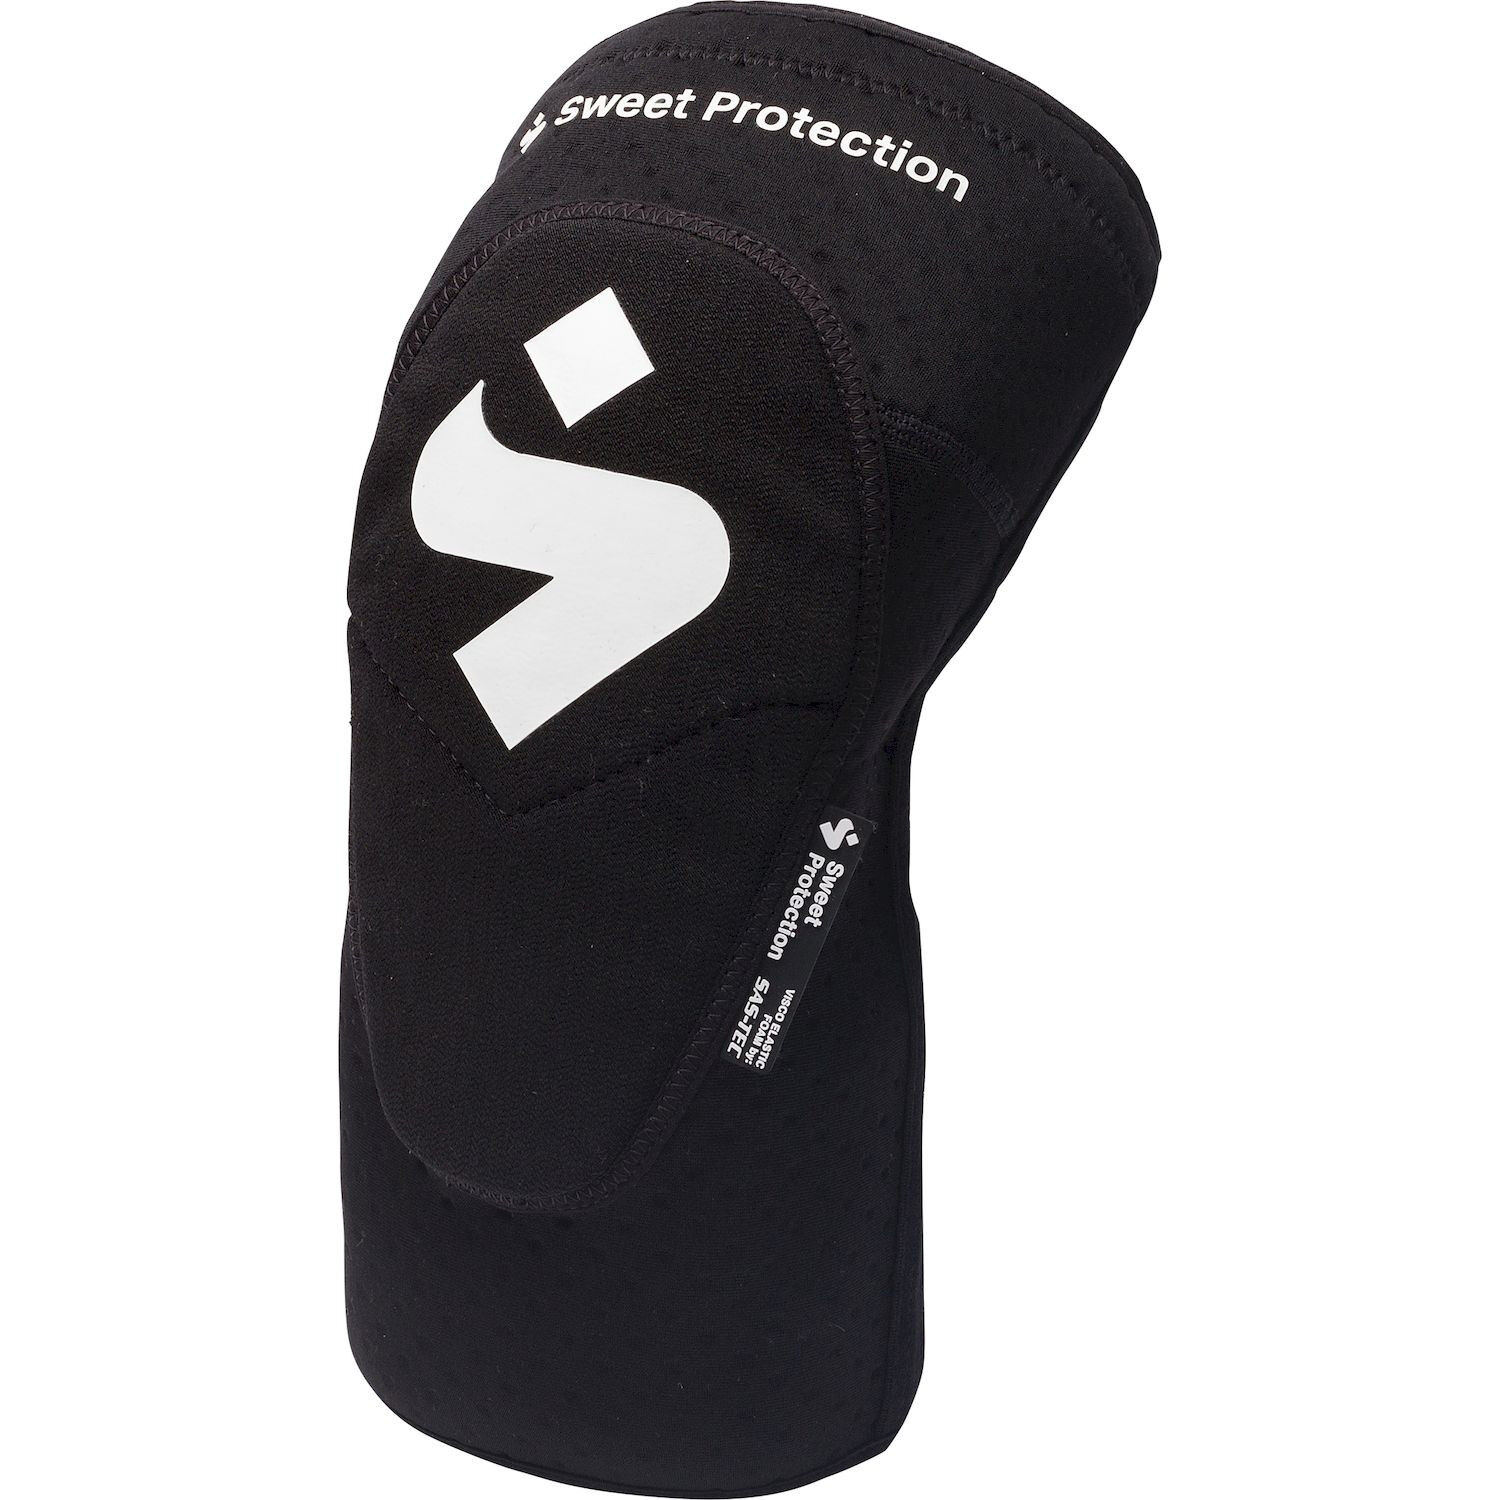 Sweet Protection Knee Guards - MTB Knee pads